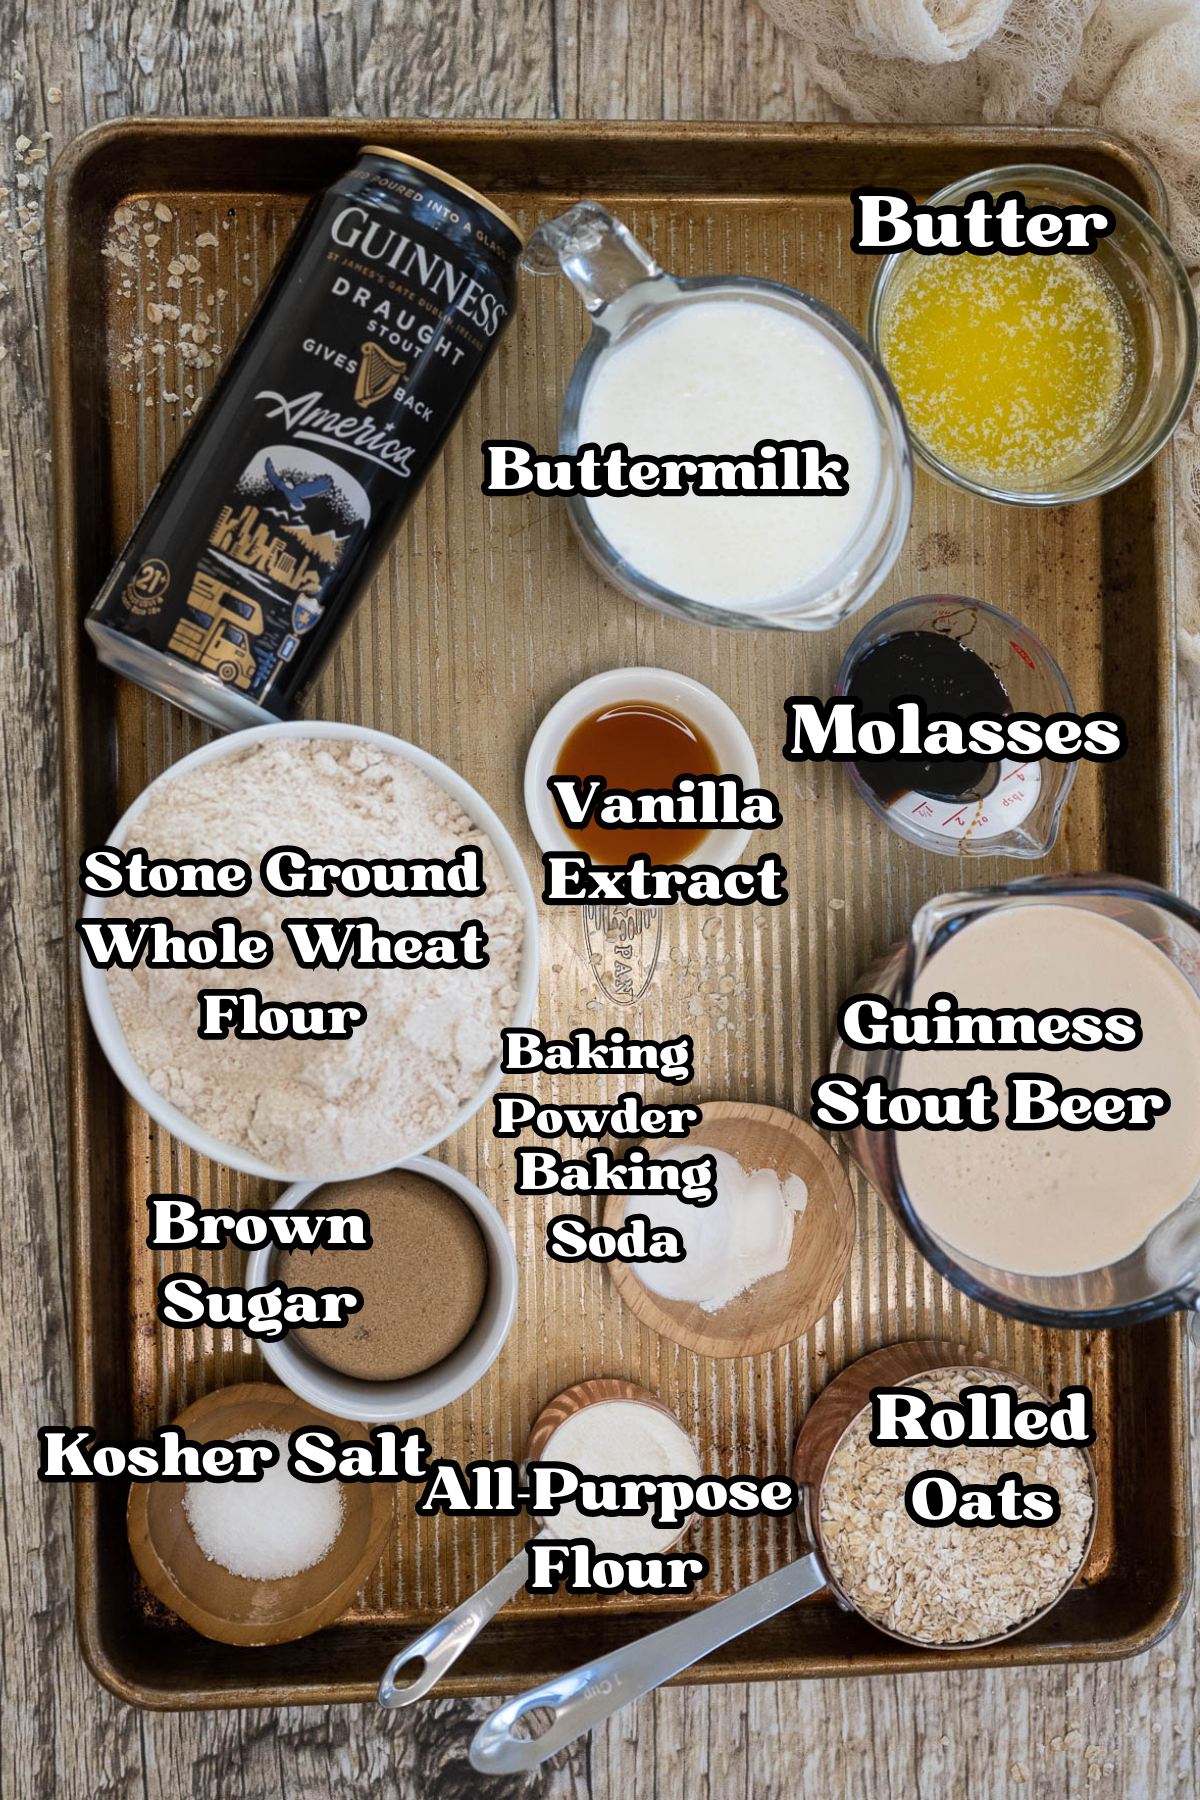 Guinness Bread recipe labeled ingredients.